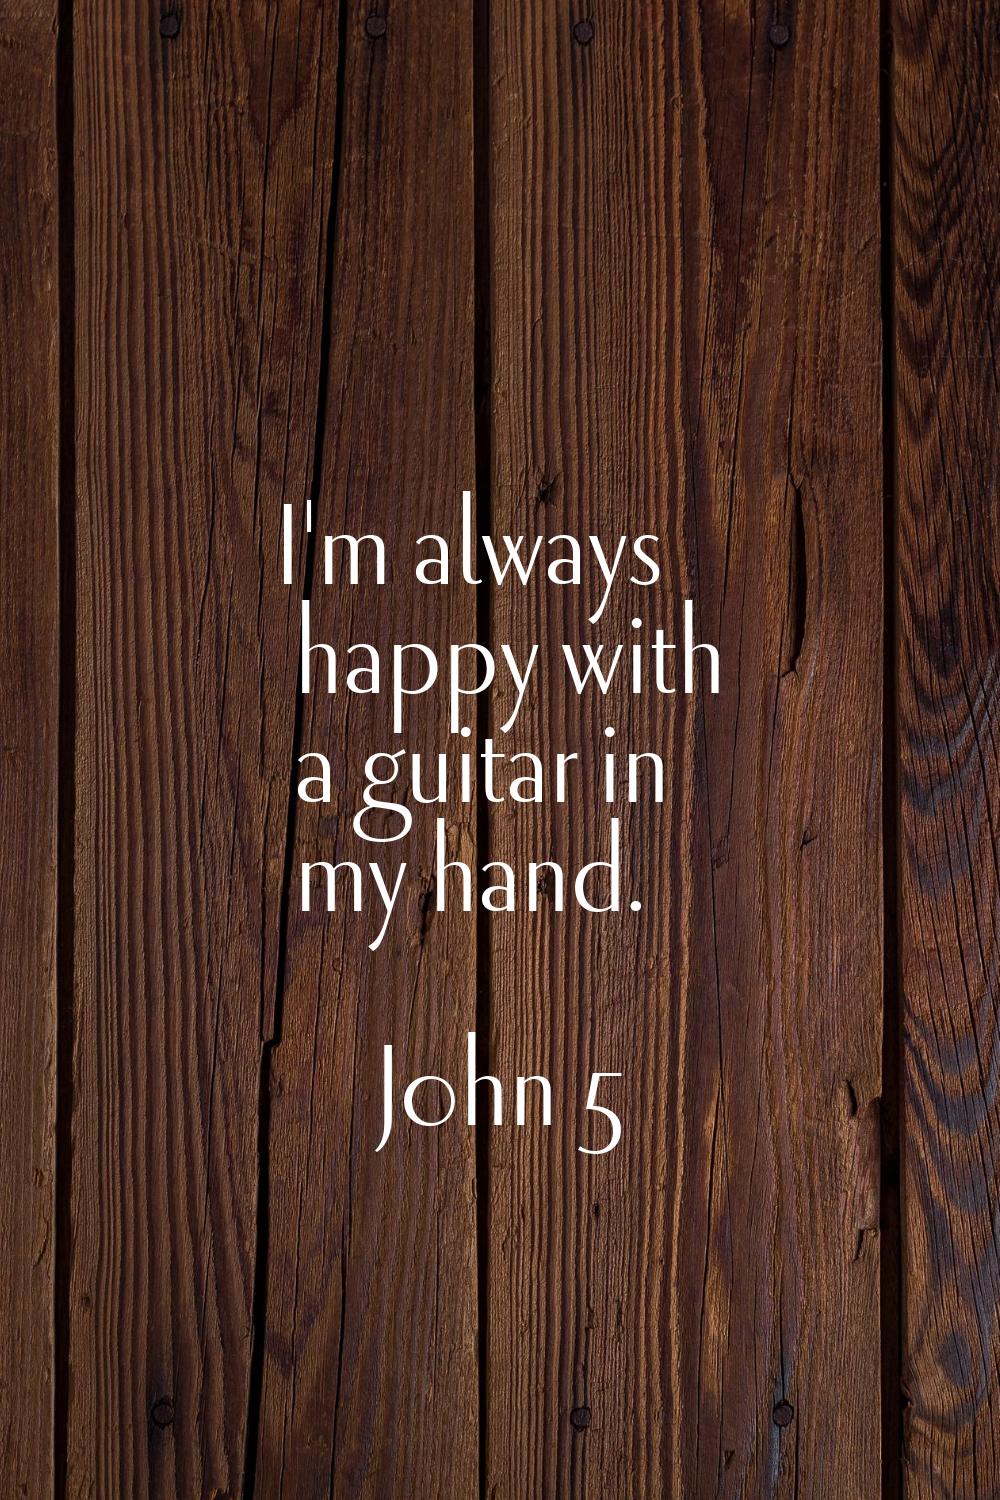 I'm always happy with a guitar in my hand.